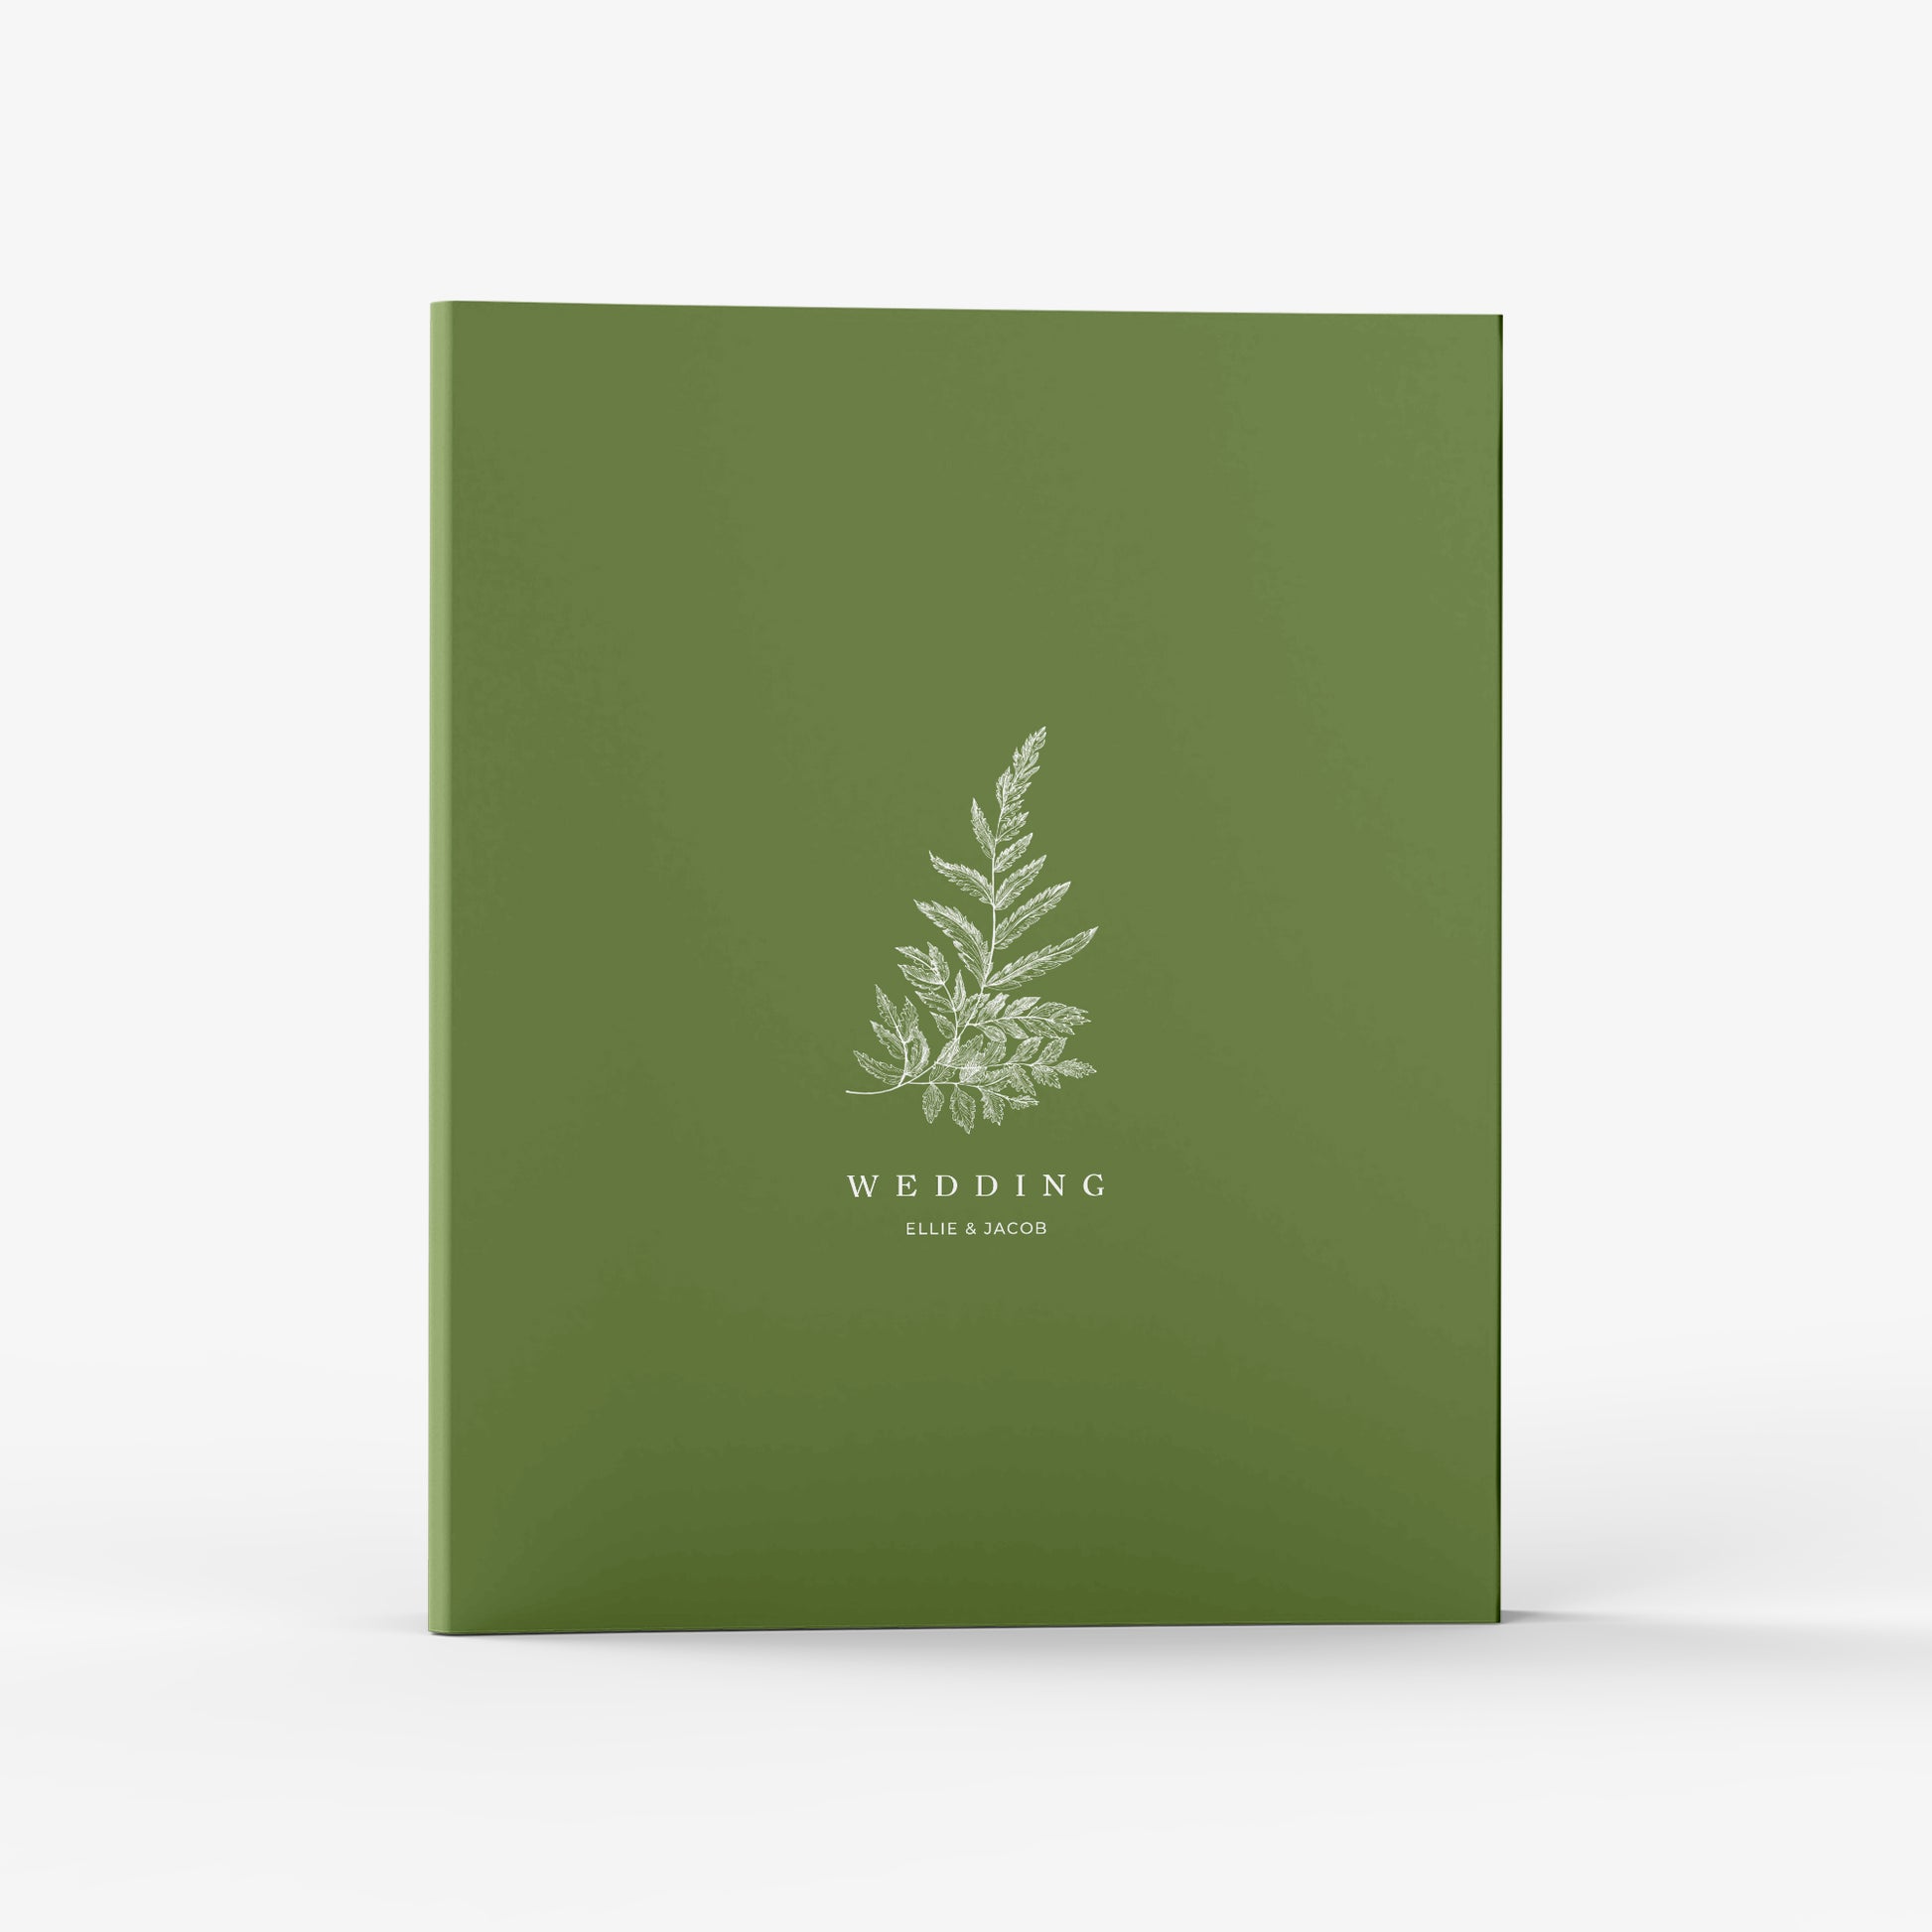 Our wedding binders are the perfect planning tool, shown in a botanical fern design